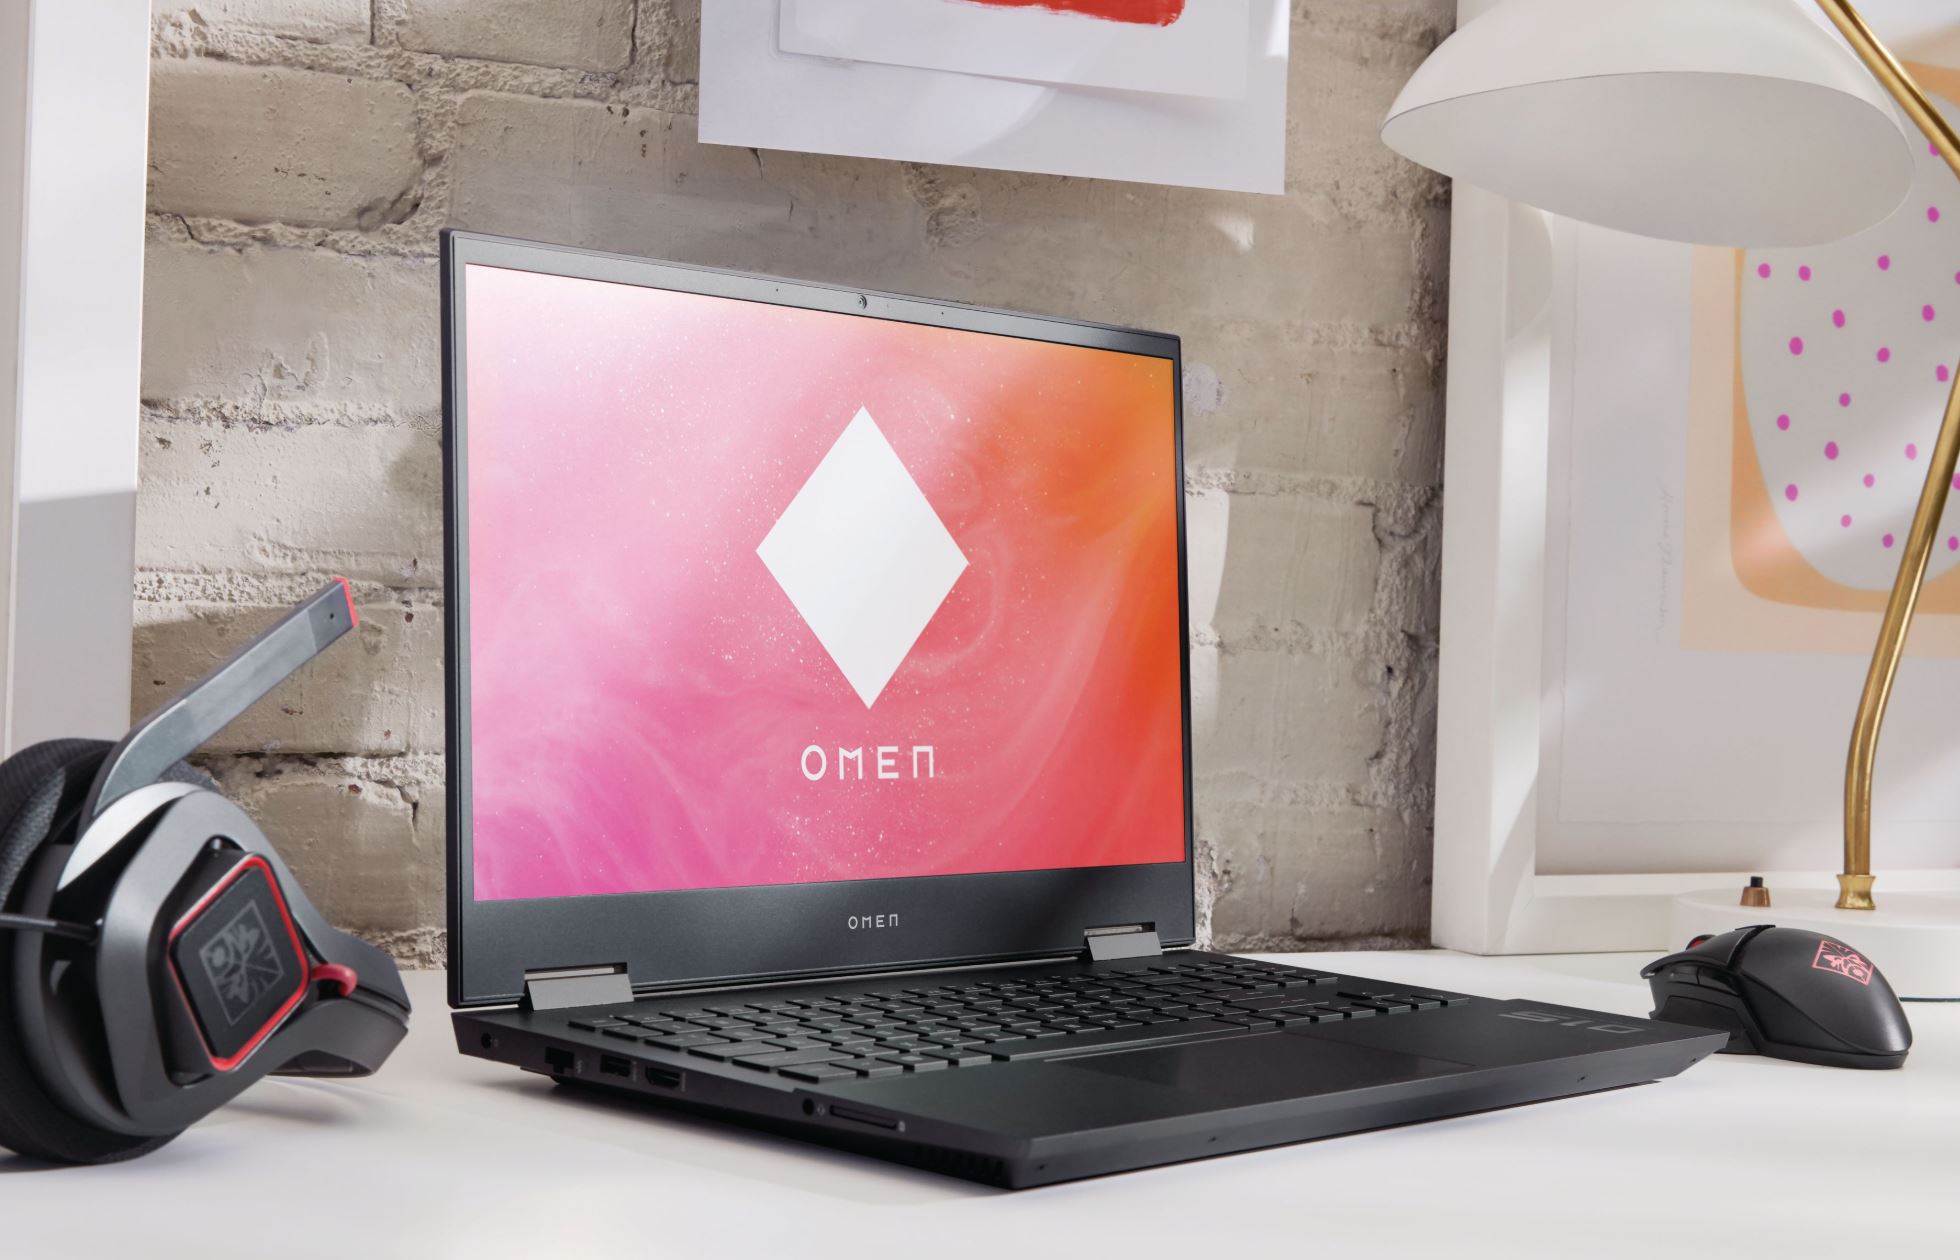 HP announces redesigned OMEN 15 gaming laptop with up to 32GB RAM and an IR thermopile sensor